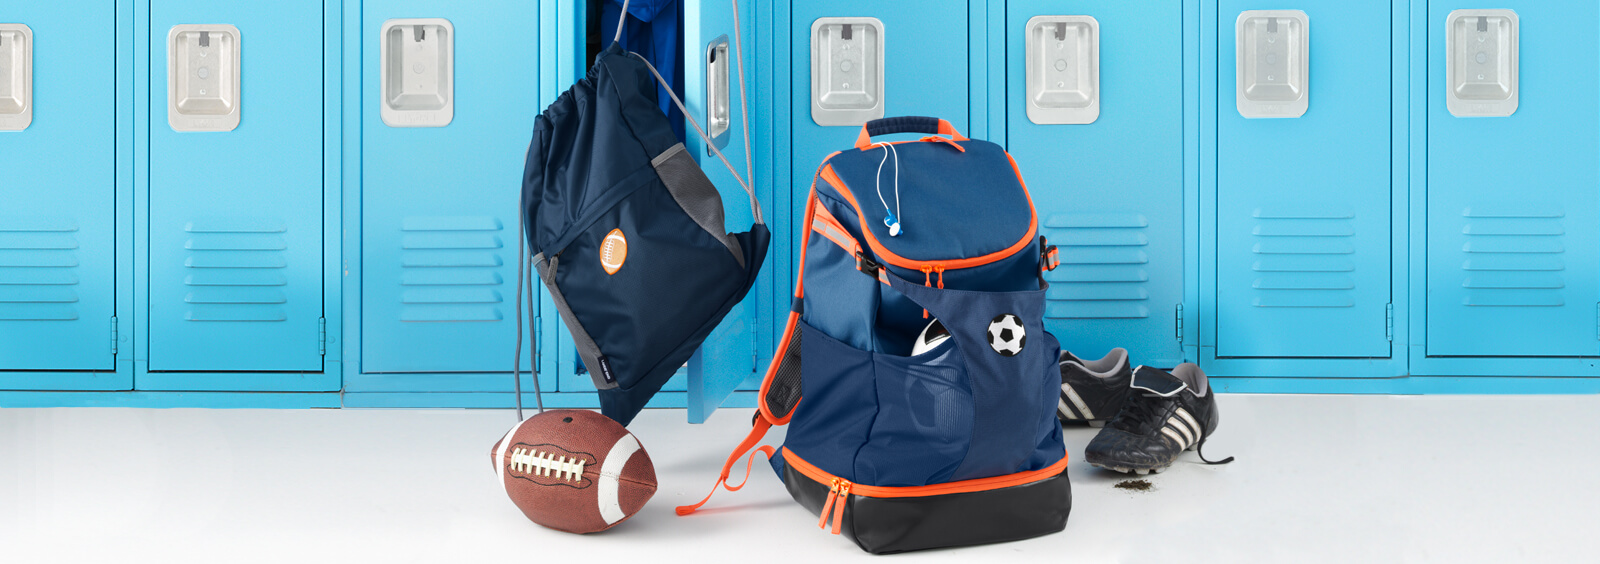 How Do I Find the Right Backpack for Sports? | Lands' End